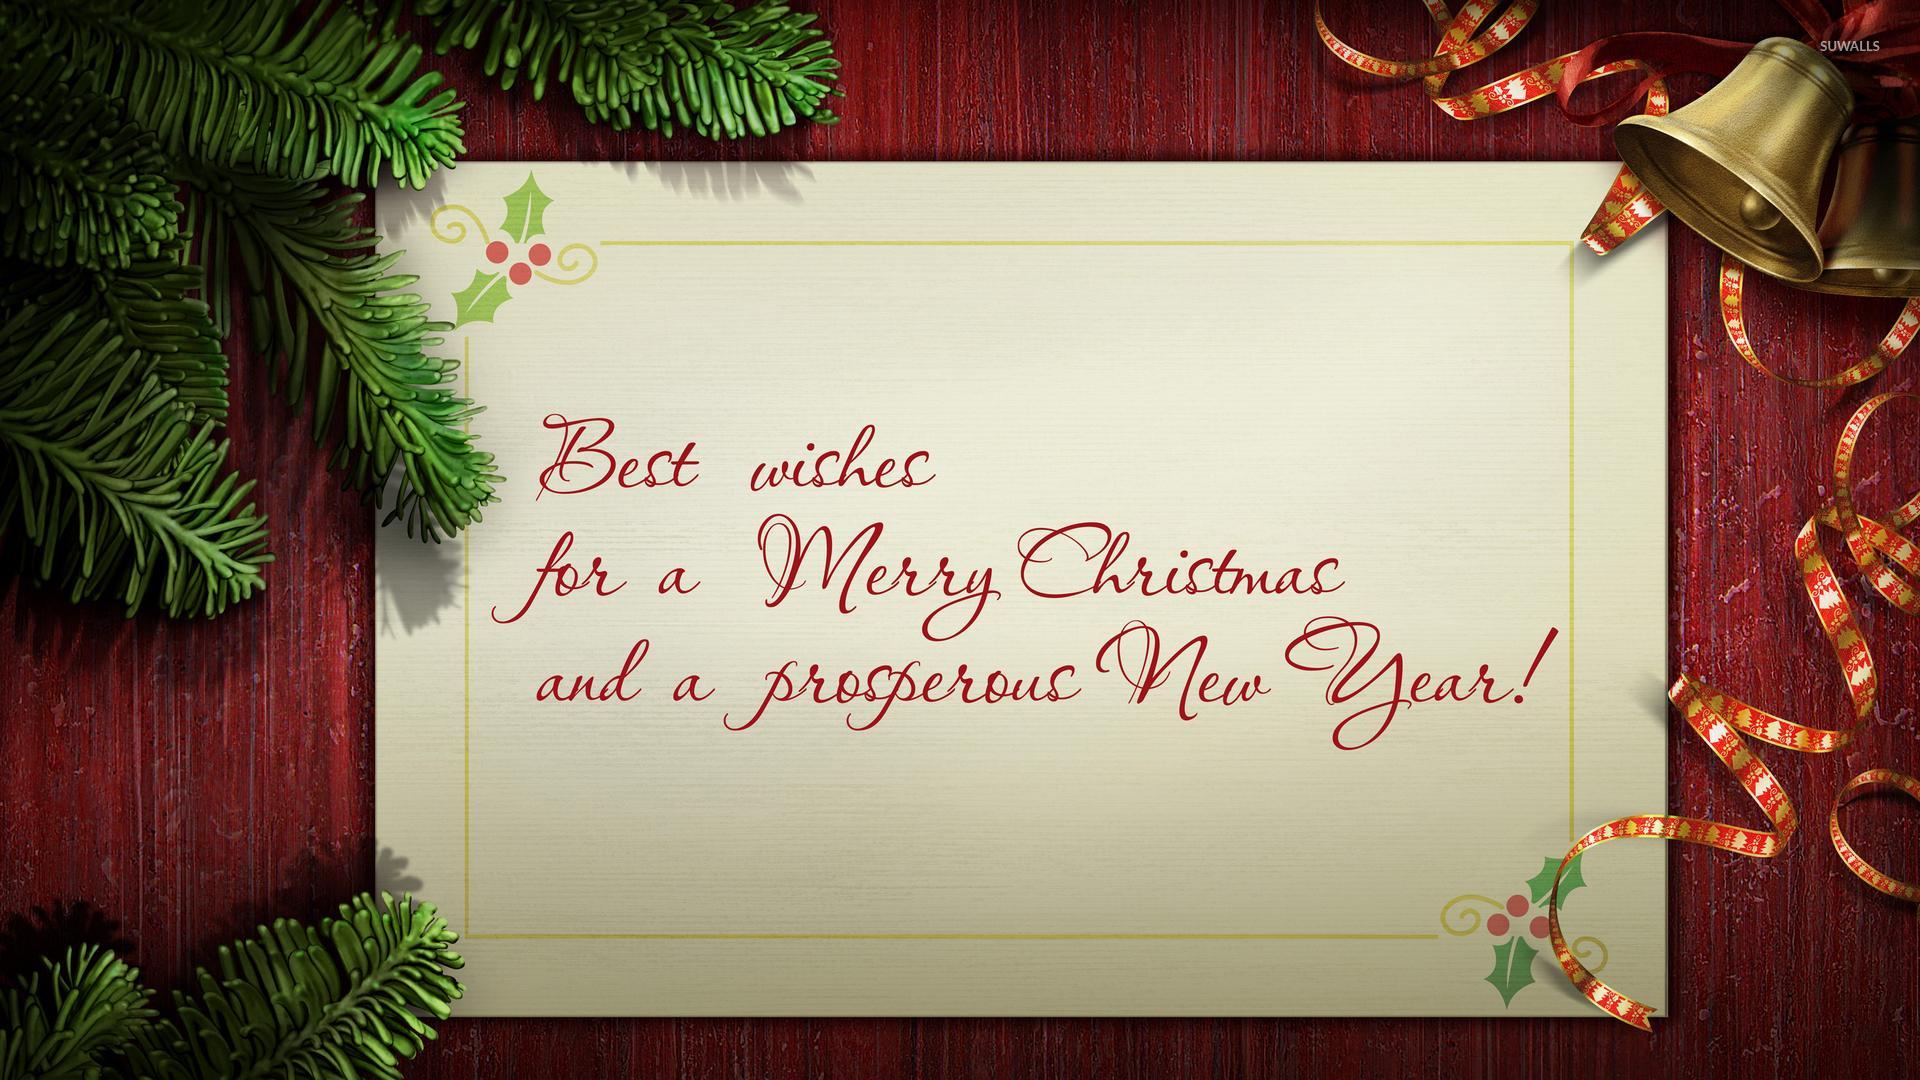 Best wishes on Christmas day and a Happy New Year wallpaper wallpaper